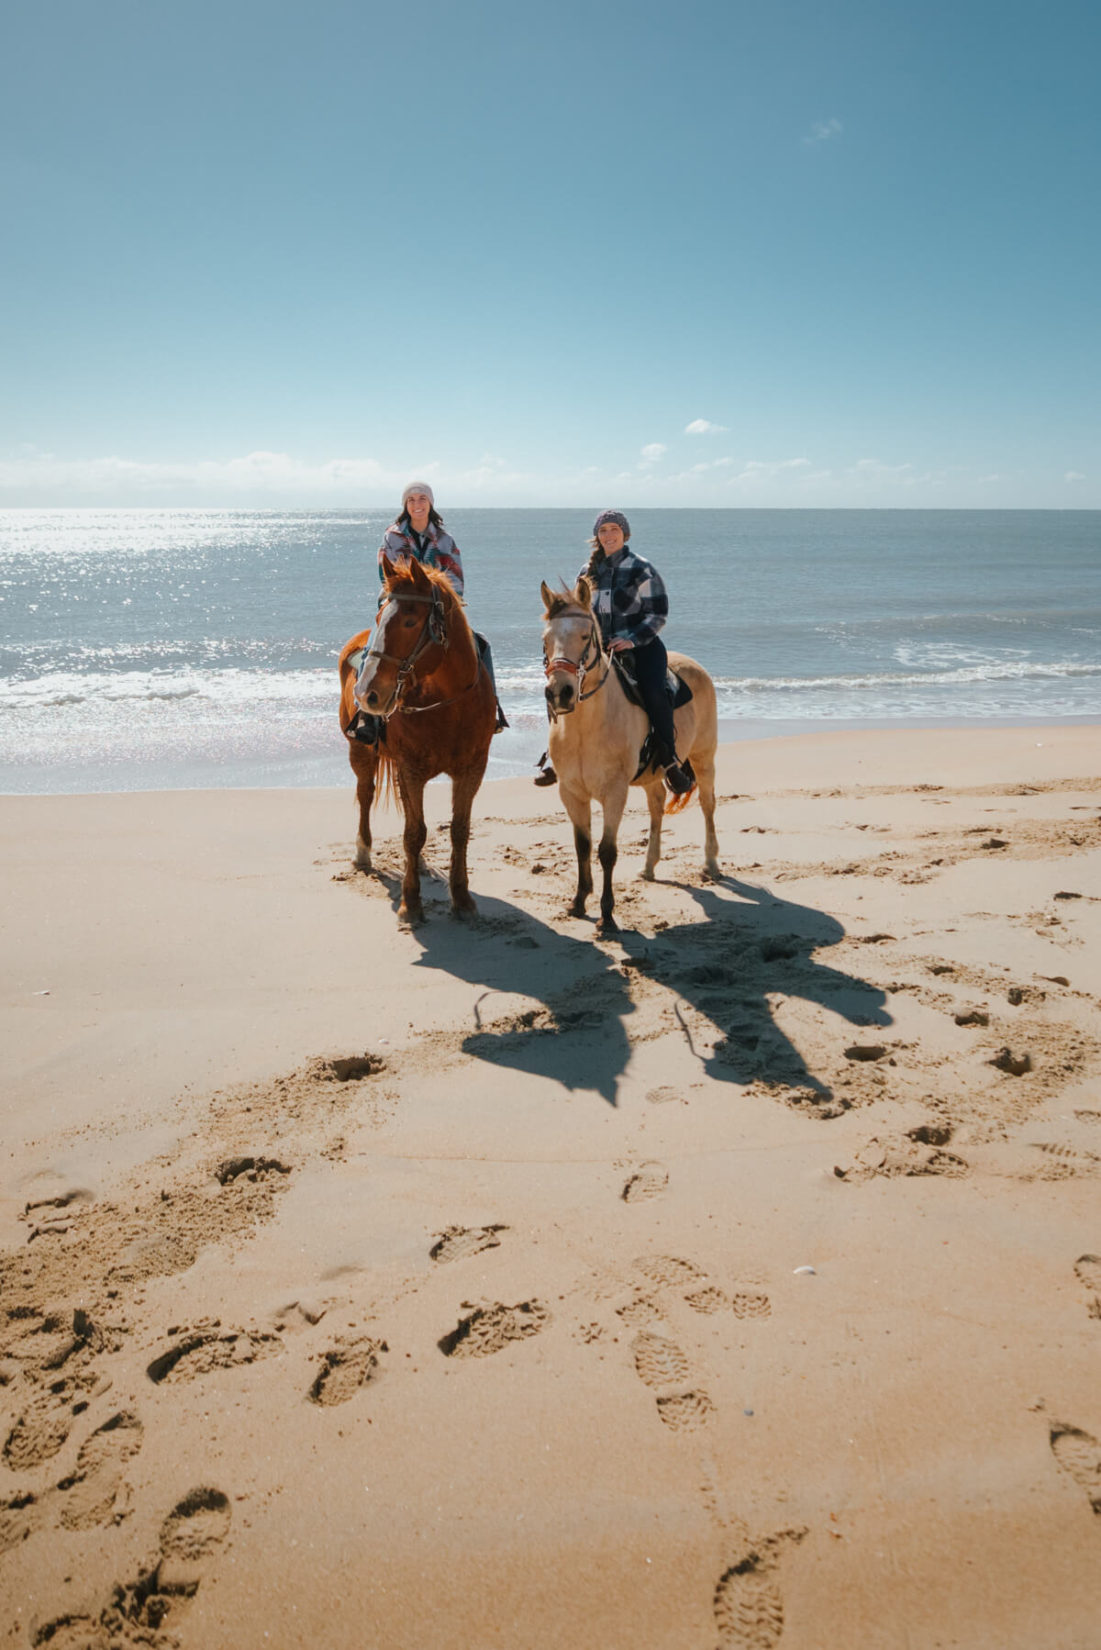 Two women riding horses on the beach